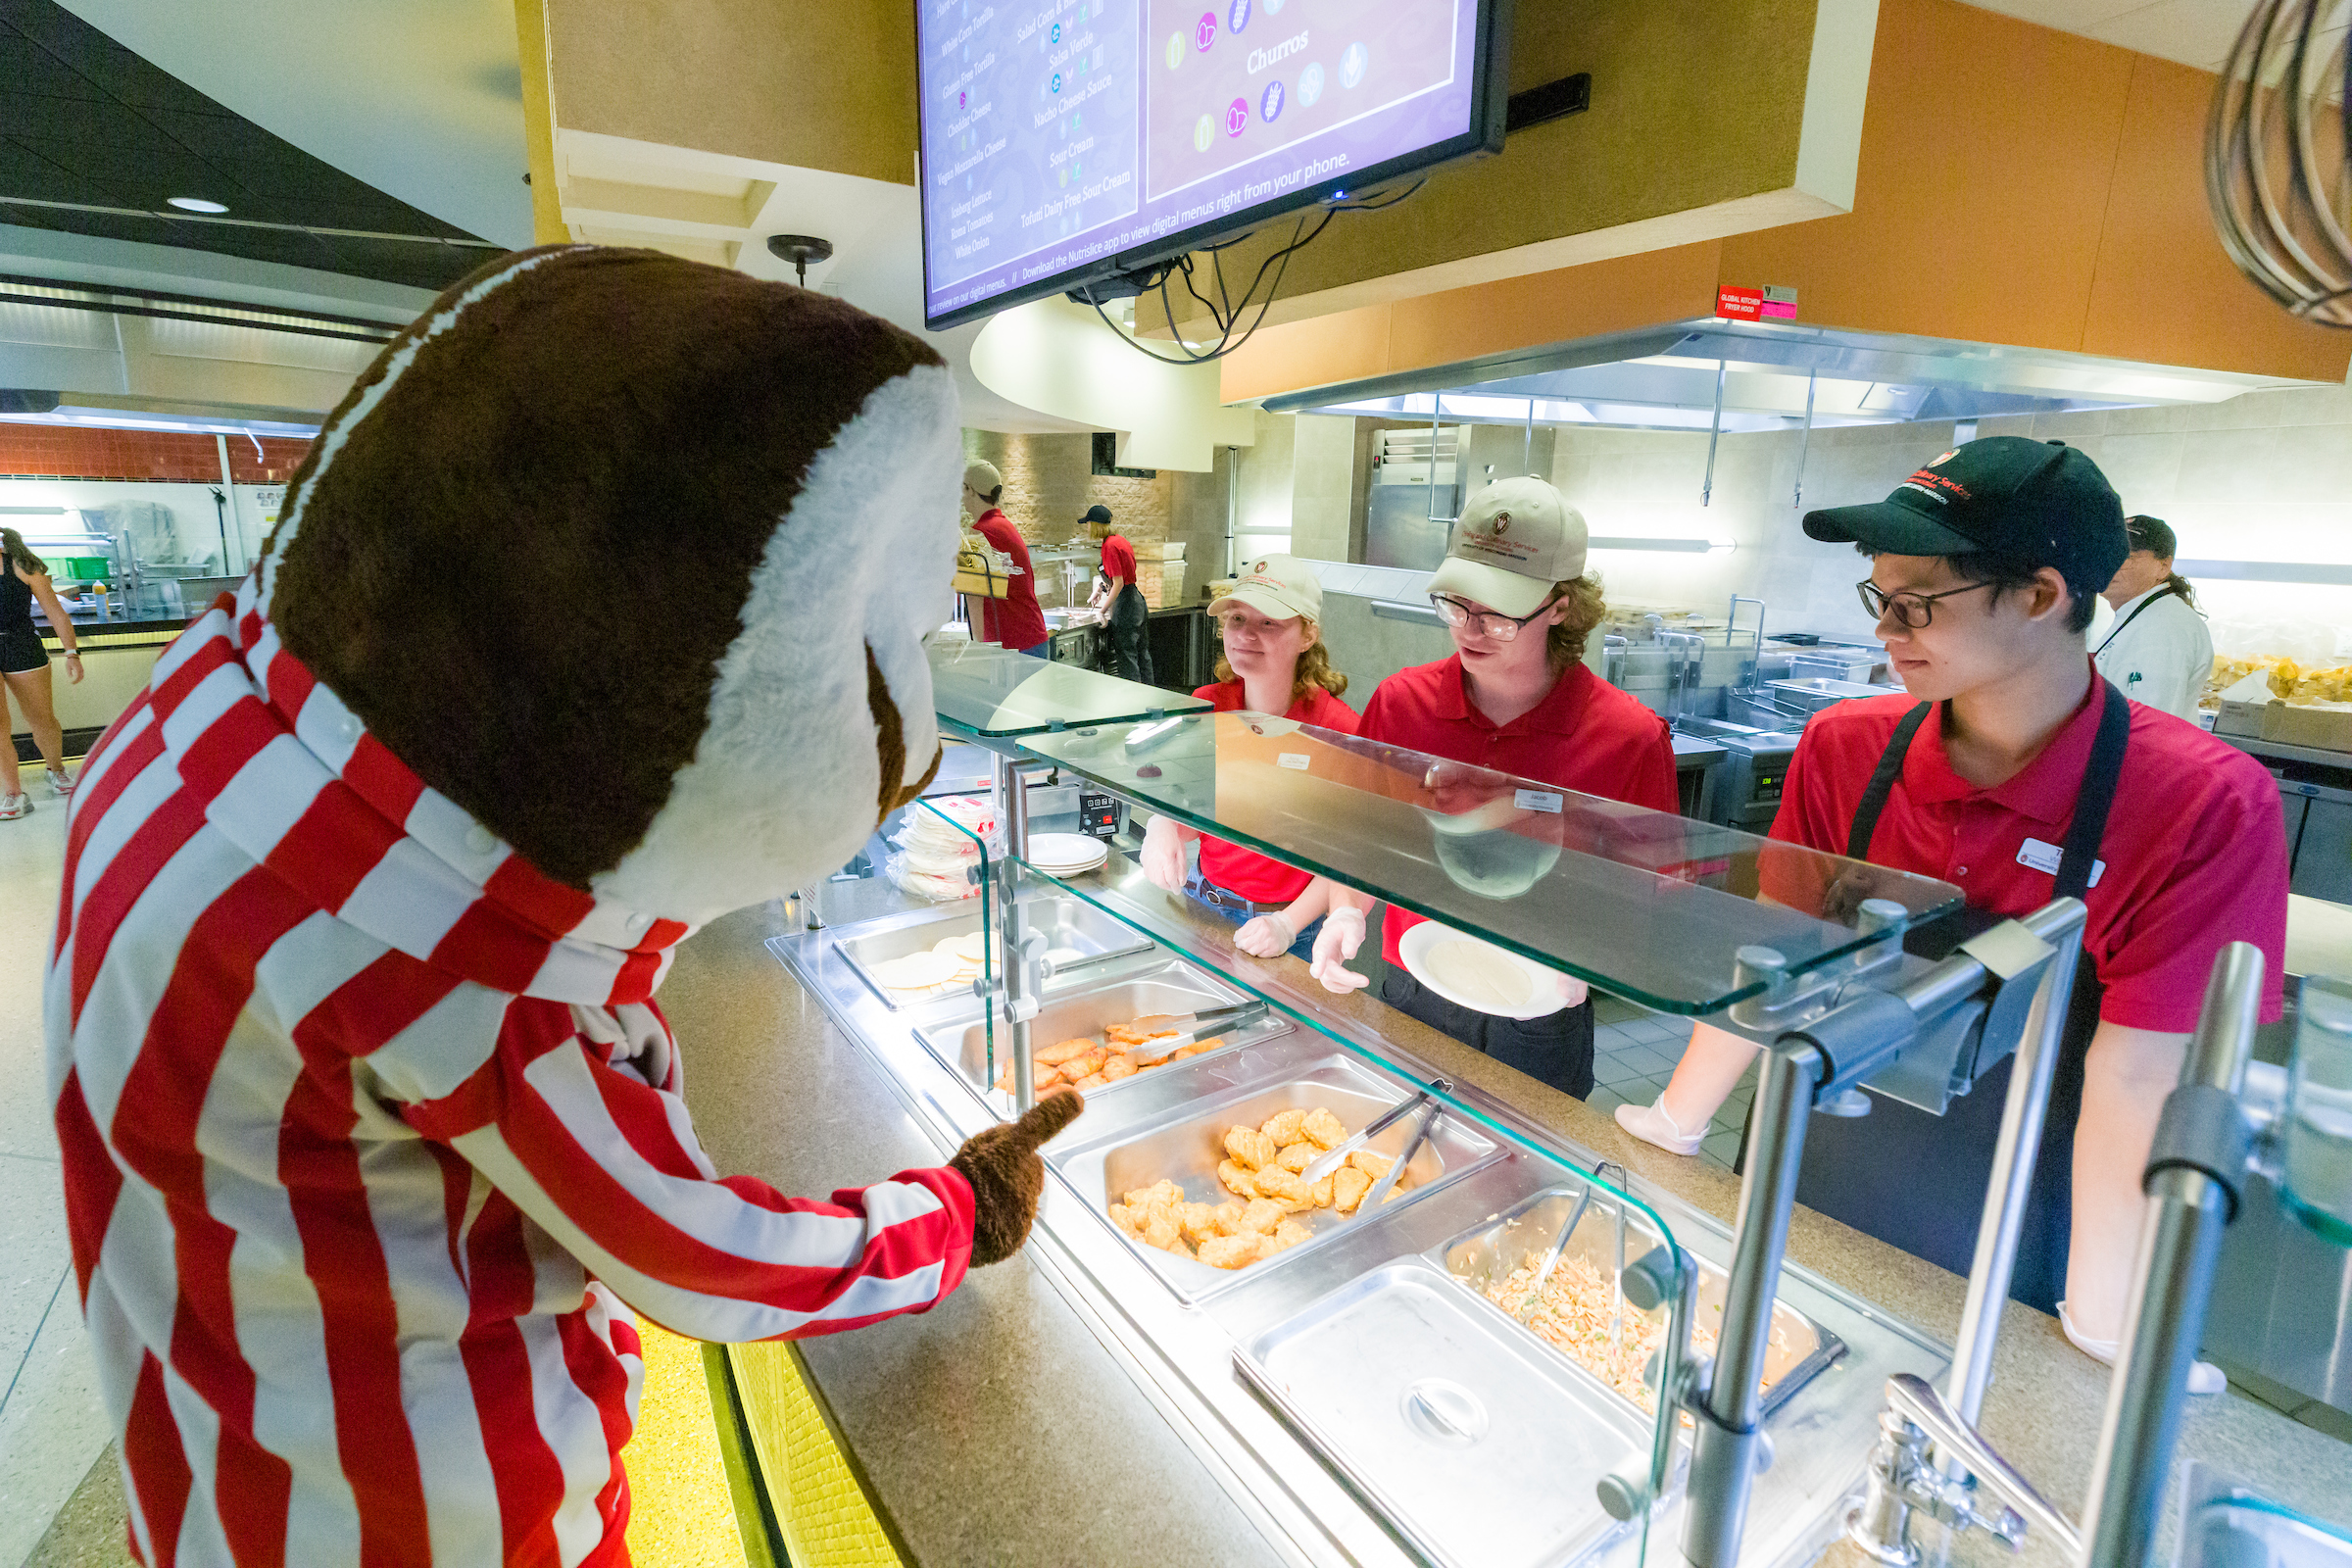 Bucky Badger selects food from the dining line while student staff look on